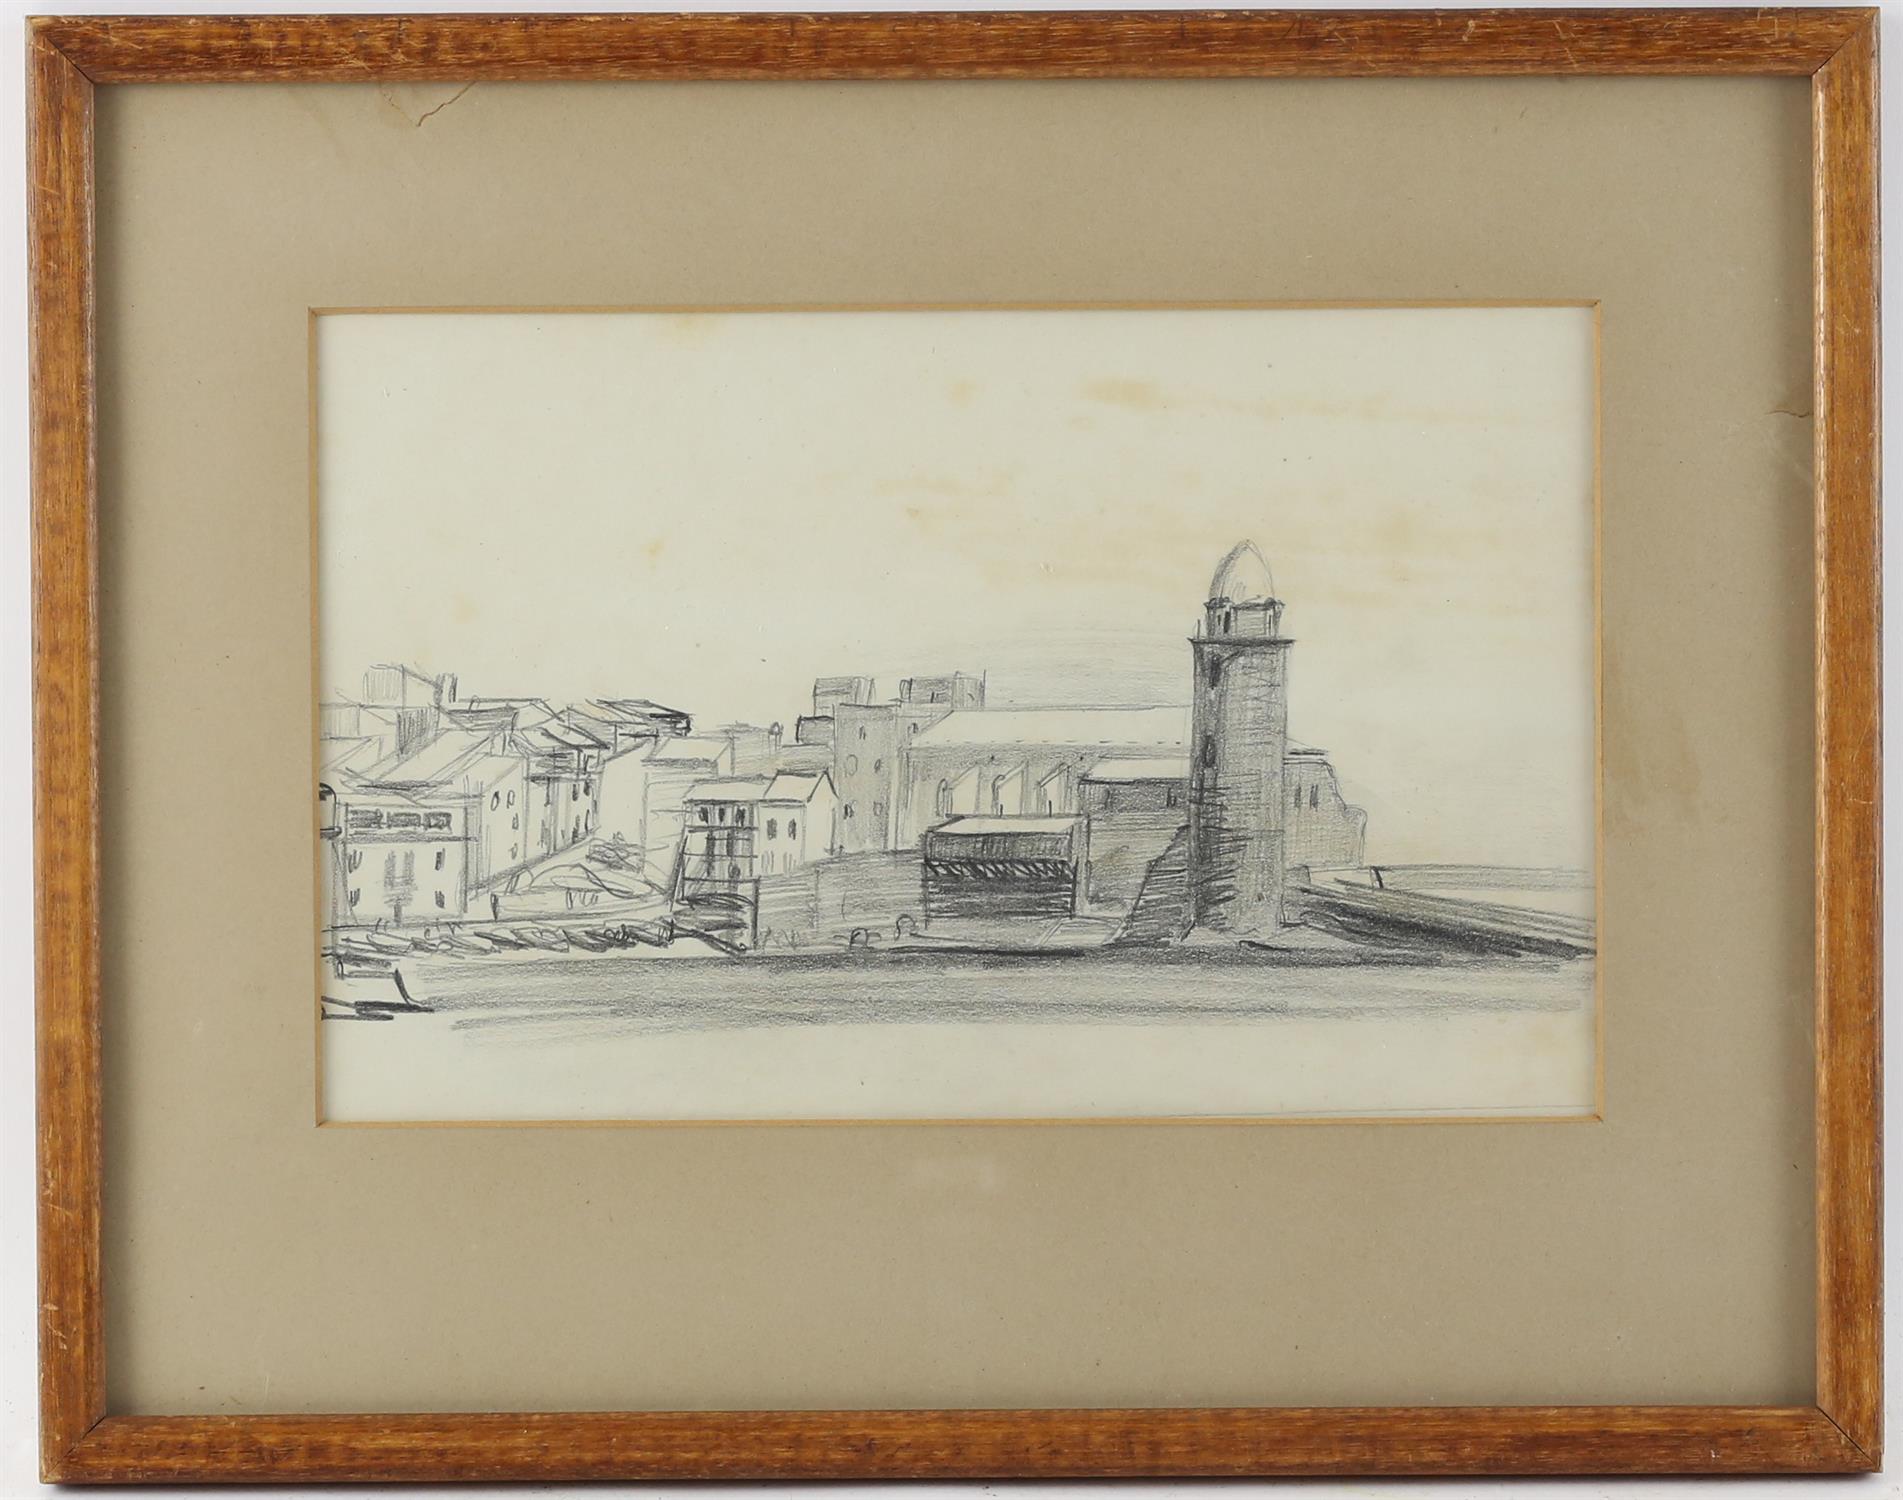 Michael Hutchings (British, 1918-2020), group of buildings. Graphite. Signed and dated 1947 verso. - Image 6 of 8